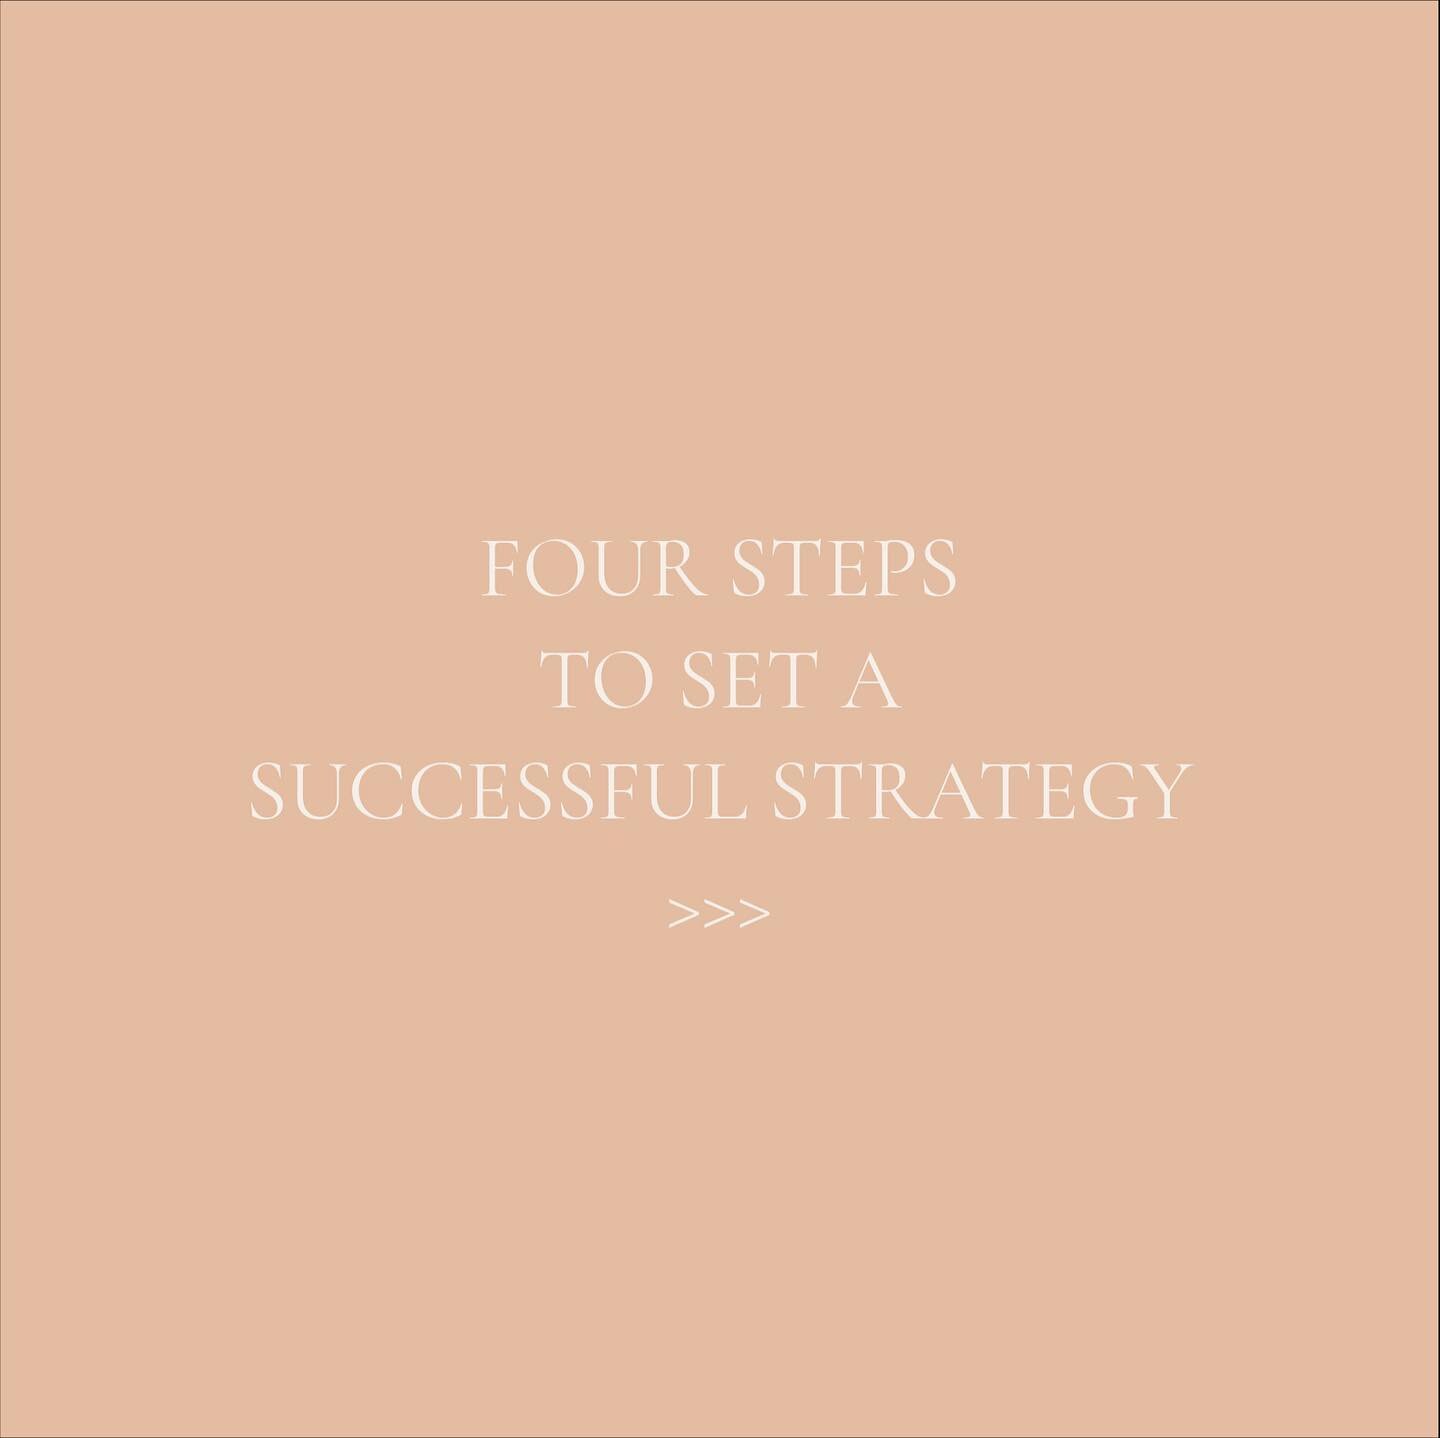 If you&rsquo;re always feeling like you are buried in to-do lists but not really making any progress&hellip;

you probably need some strategy in your biz life. 

If you&rsquo;re trying to do all the right things as quickly as you can, but feel like y